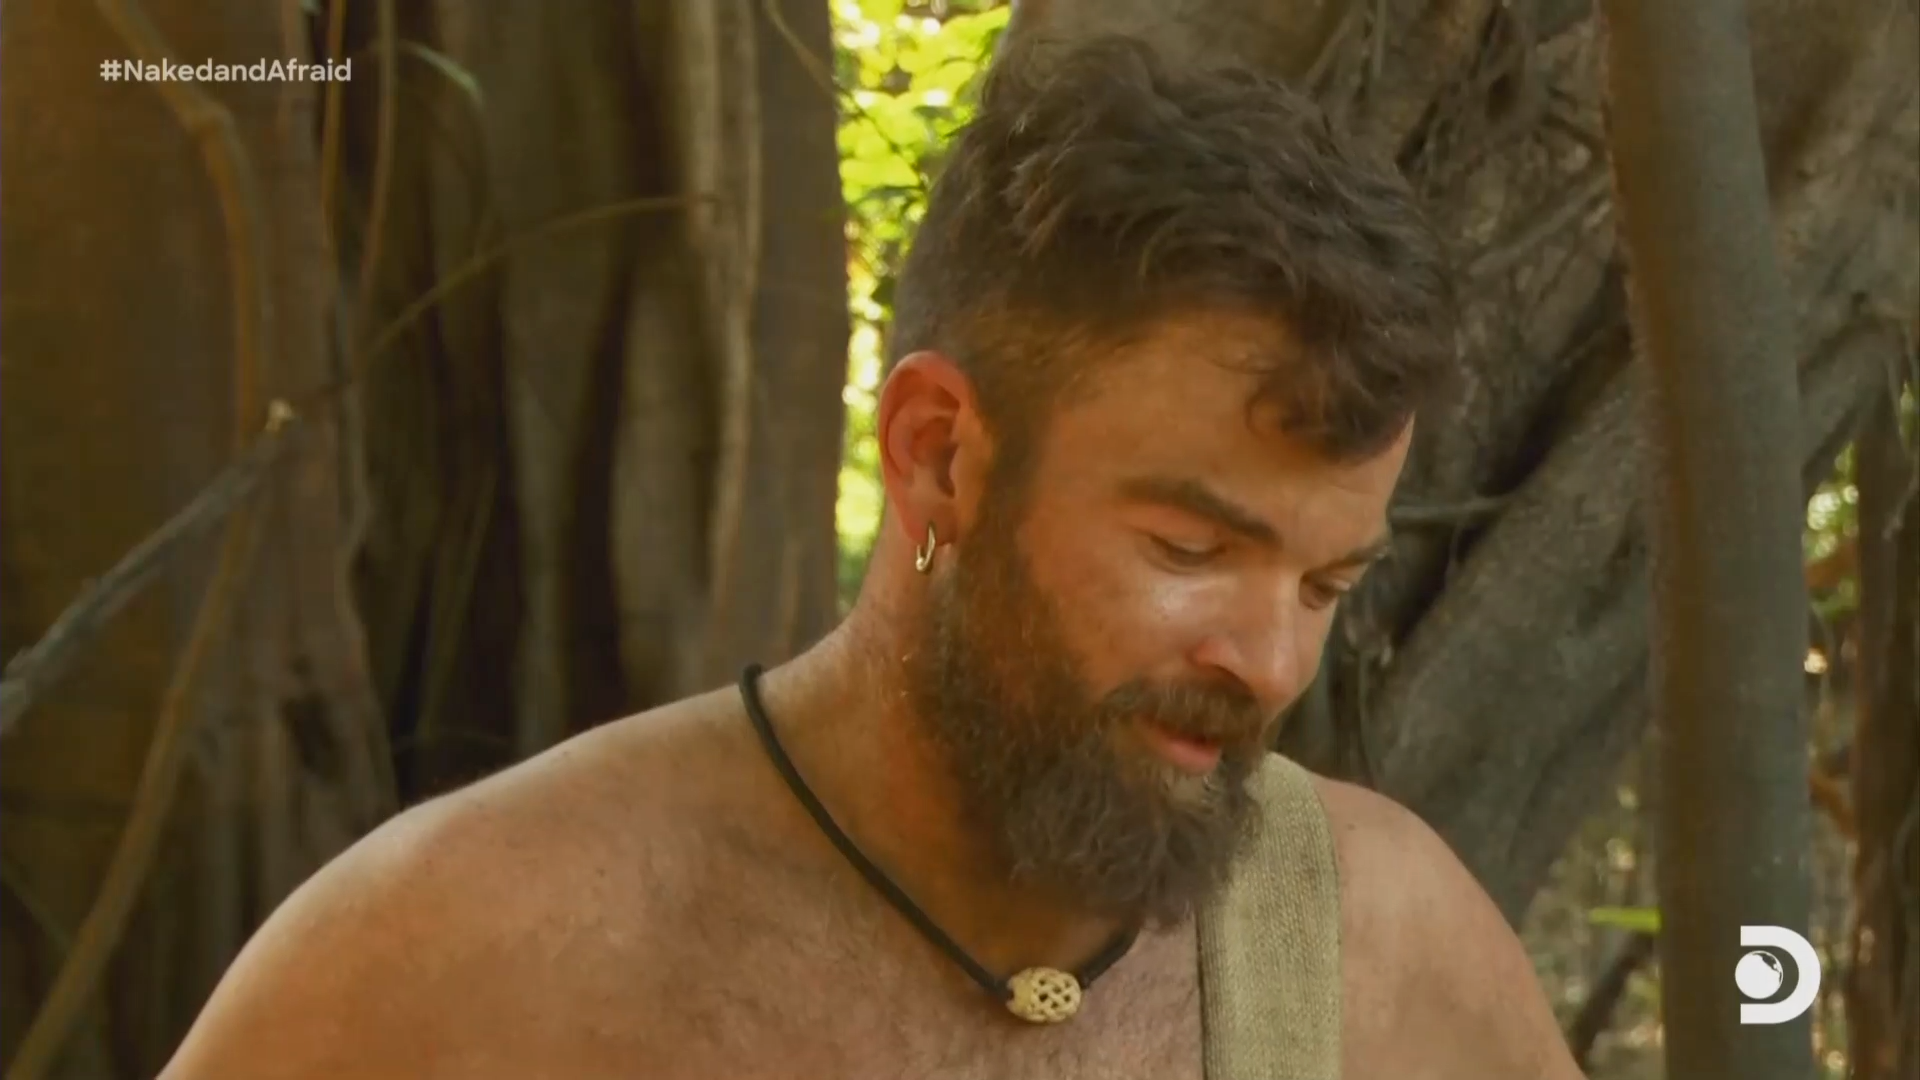 ava and steven naked and afraid